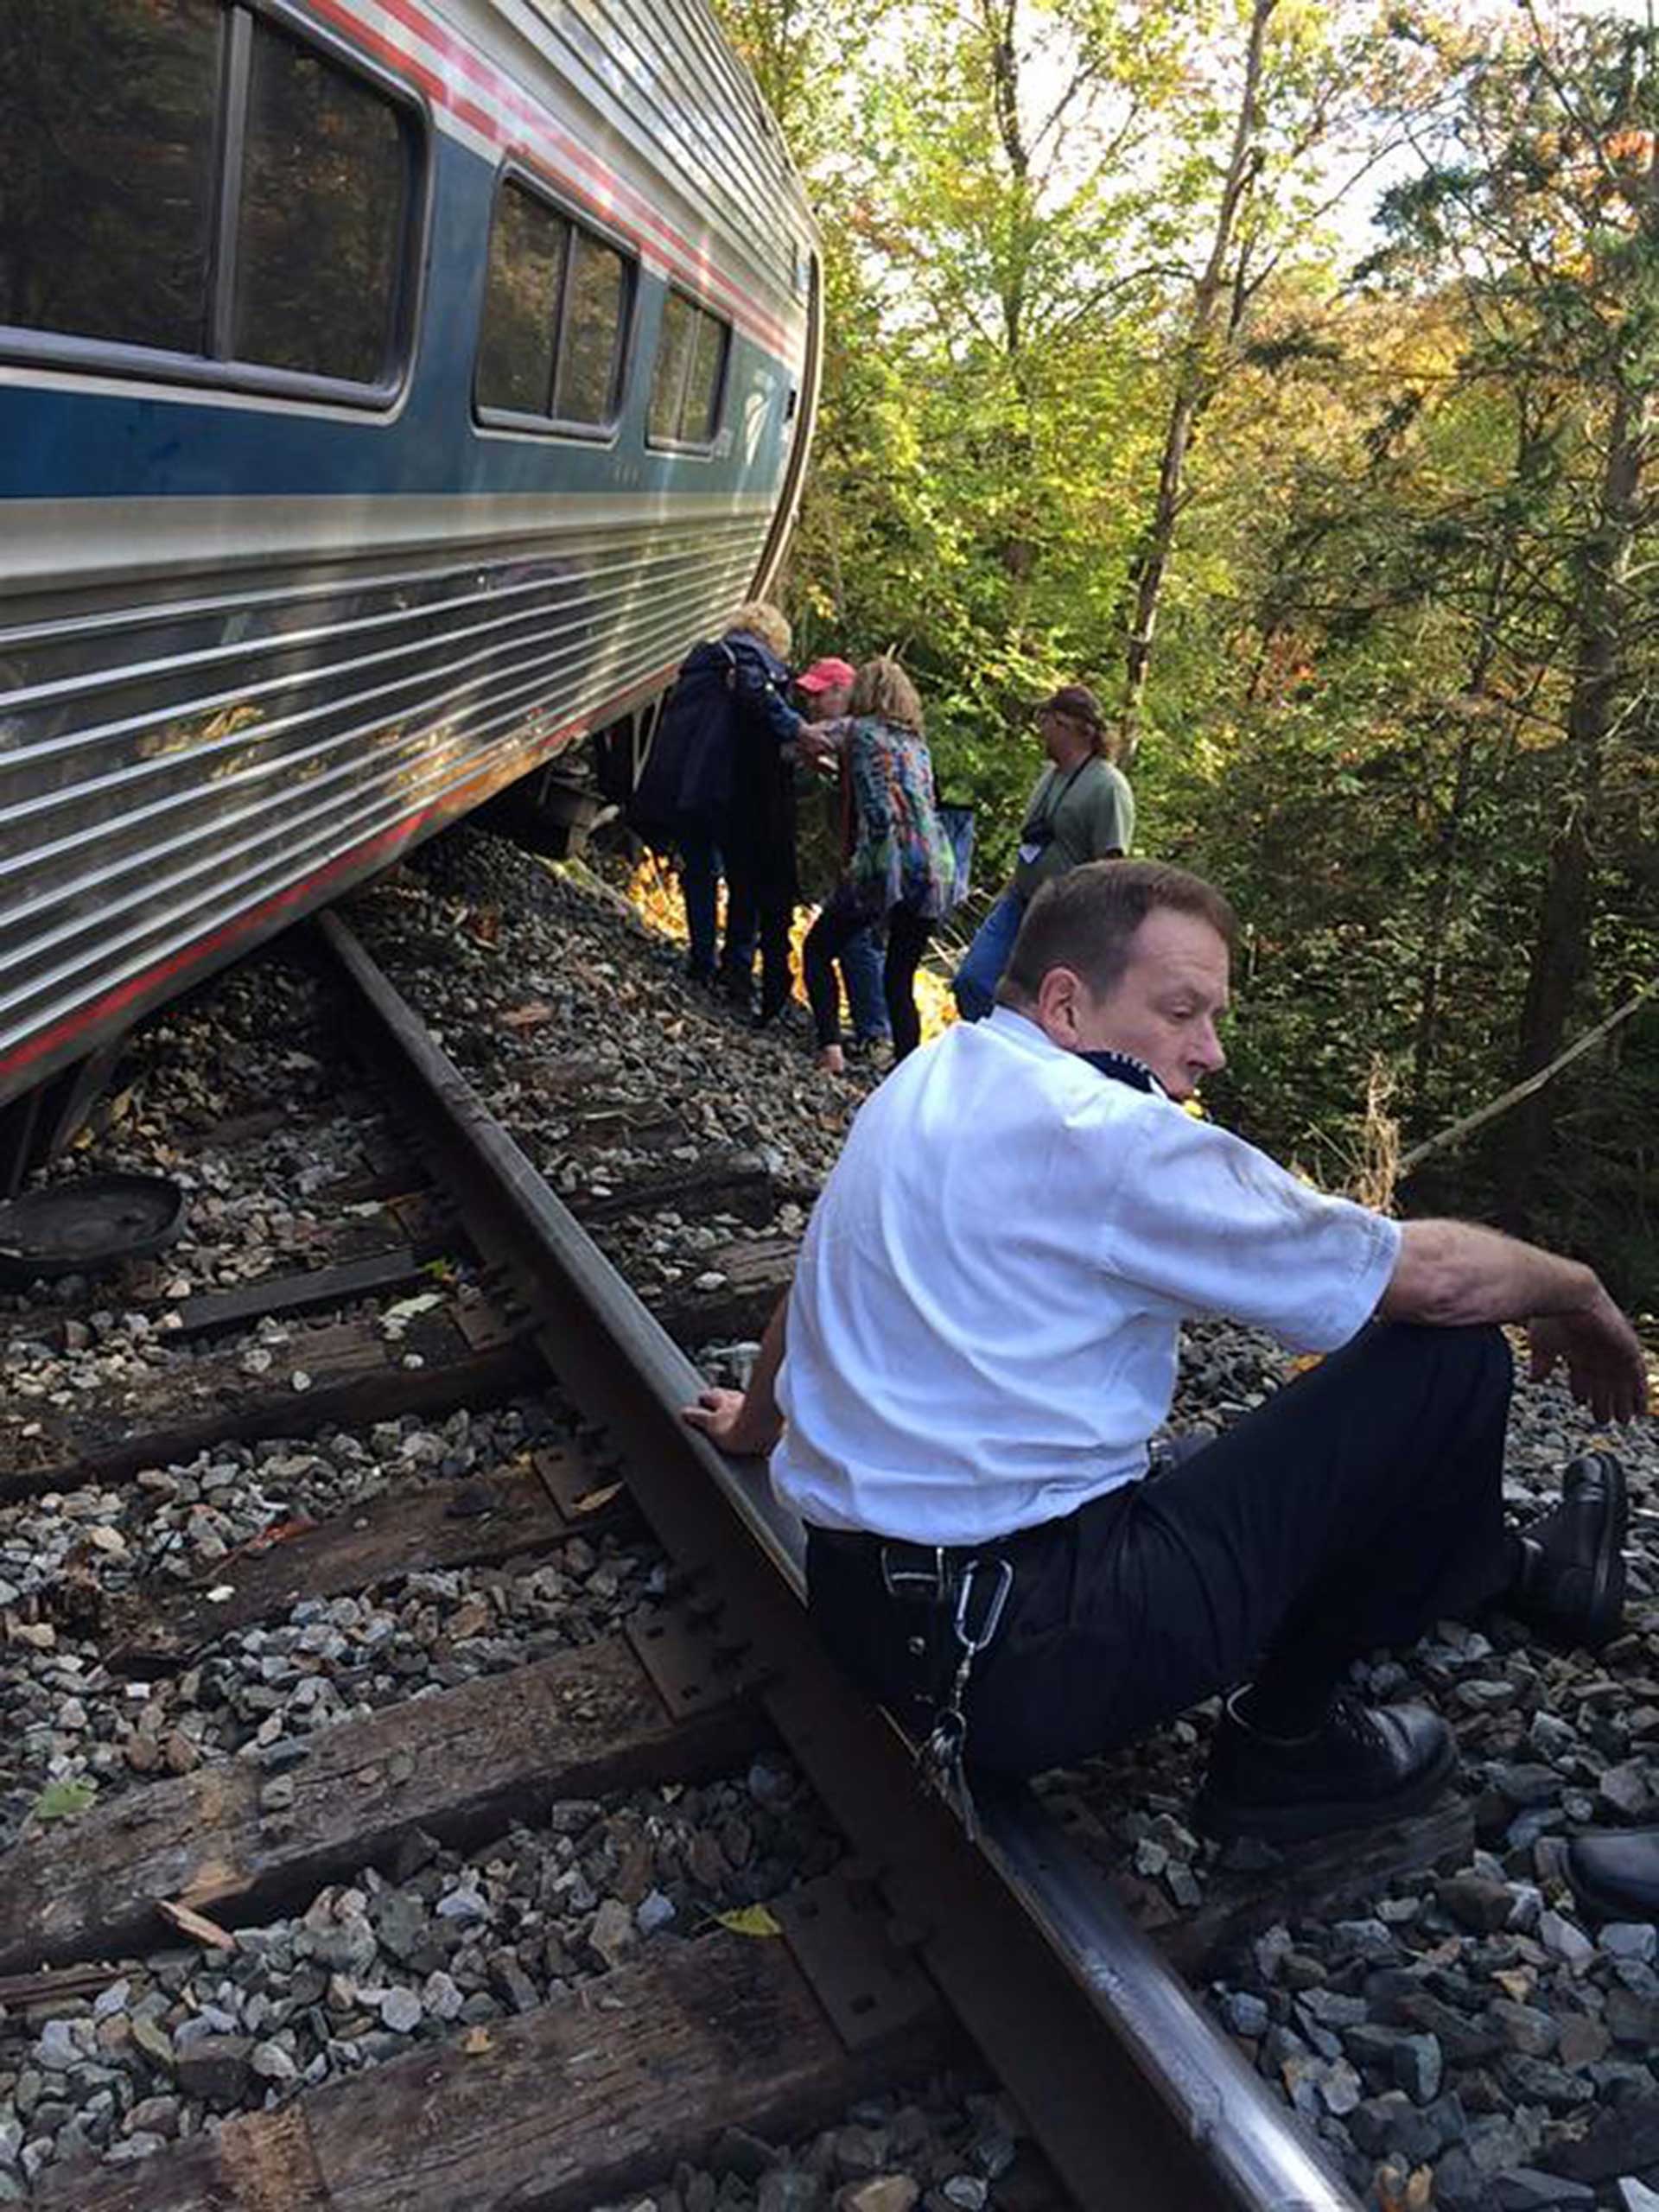 In this image released by BrianABELL1980 via Twitter and used with permission showing the scene after an Amtrak train derailed, reportedly after hitting a rockslide, near Northfield, Vermont, Oct. 5, 2015. (Brianabell1980—Twitter/EPA)